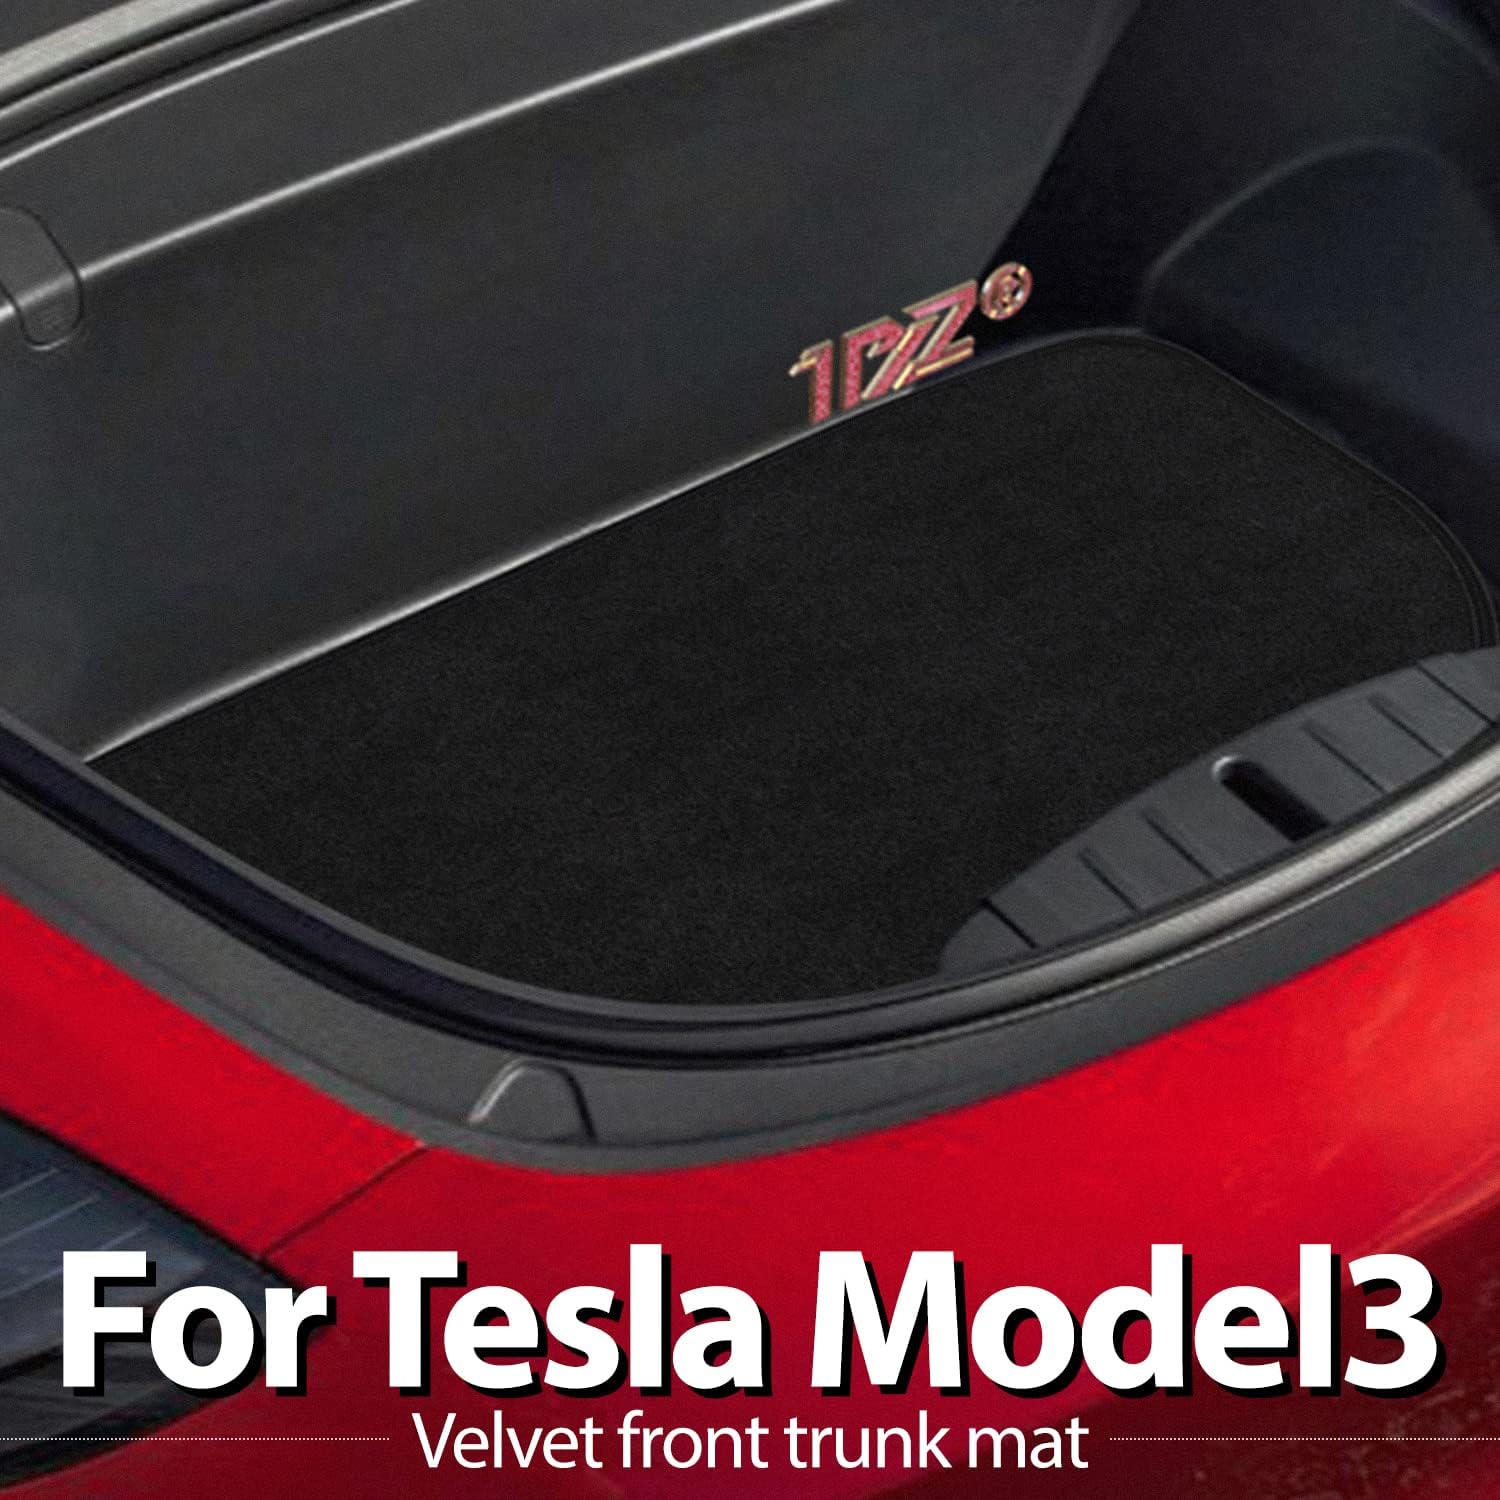 1PZ Black Front Trunk Mat Replacement for Tesla Model 3 2021 Full Guard Heavy Duty Cargo Mat Accessories